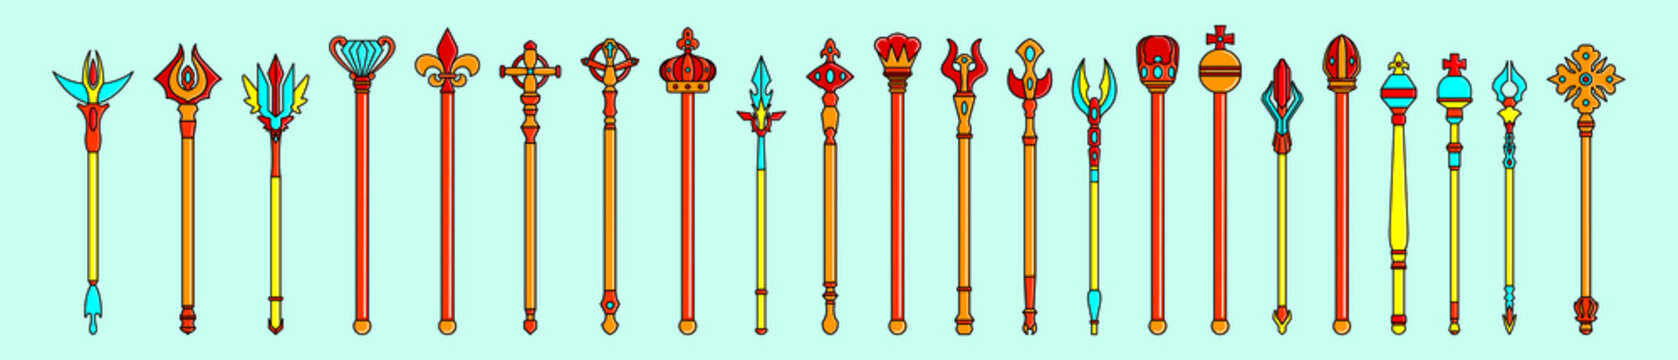 set of scepter. symbol of monarchy design template with various models. vector illustration isolated on blue background